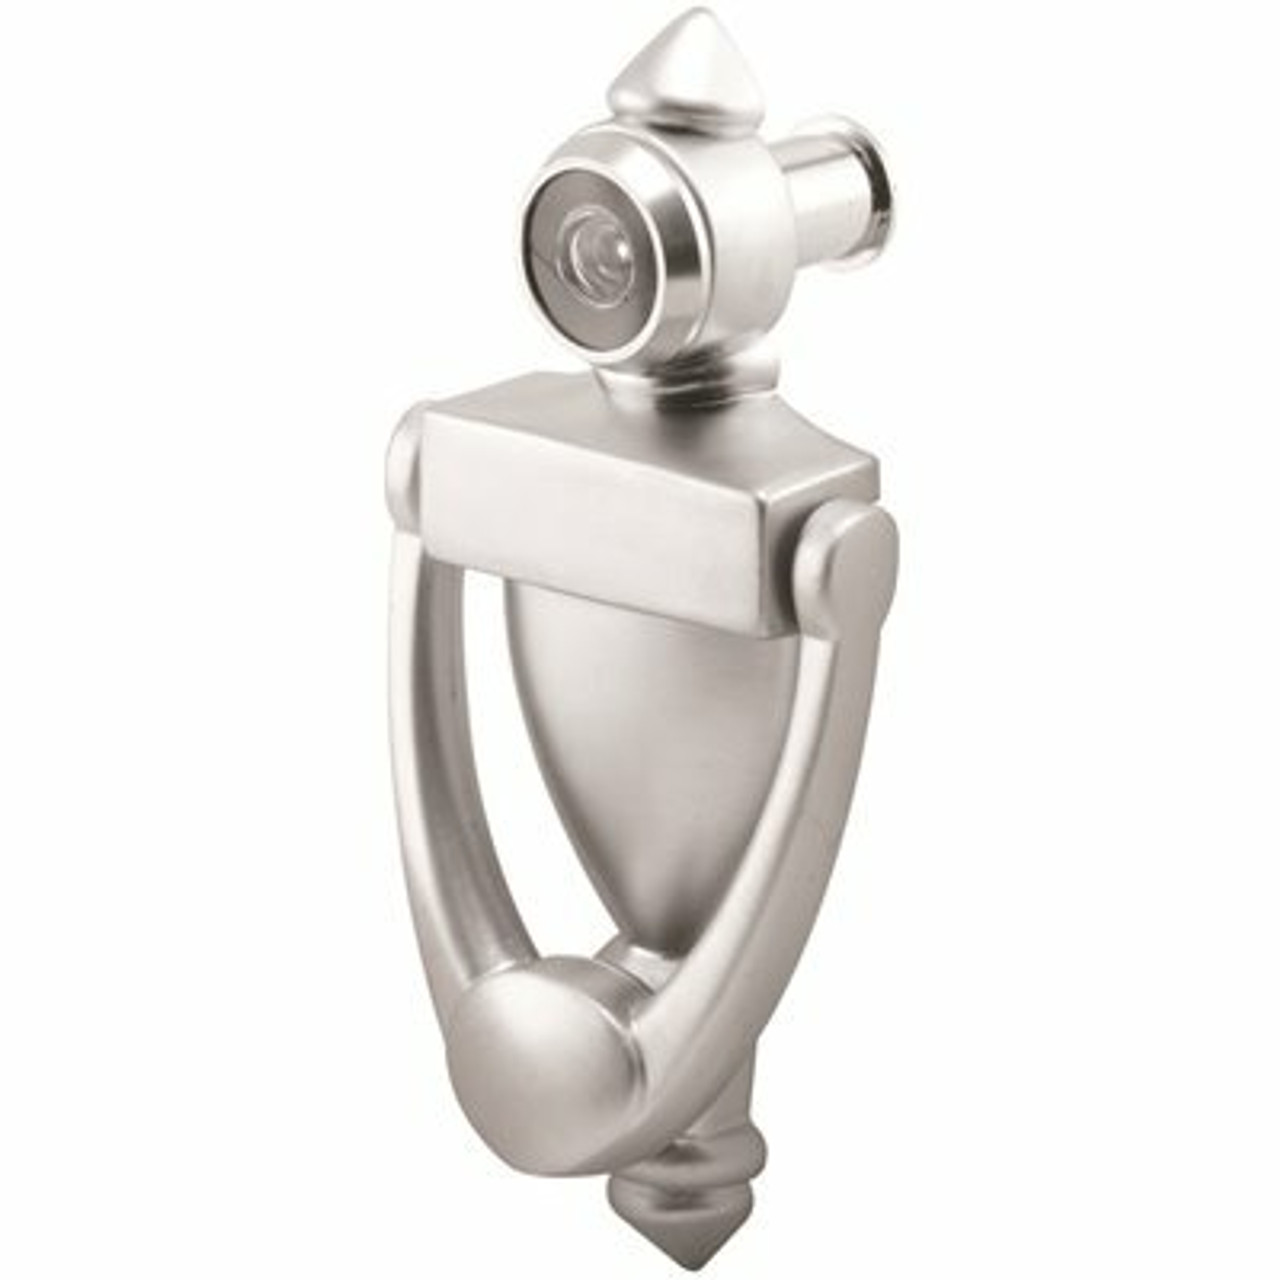 Prime-Line Door Knocker And Viewer, 9/16 In. Bore, 160-Degree View Angle, Satin Chrome